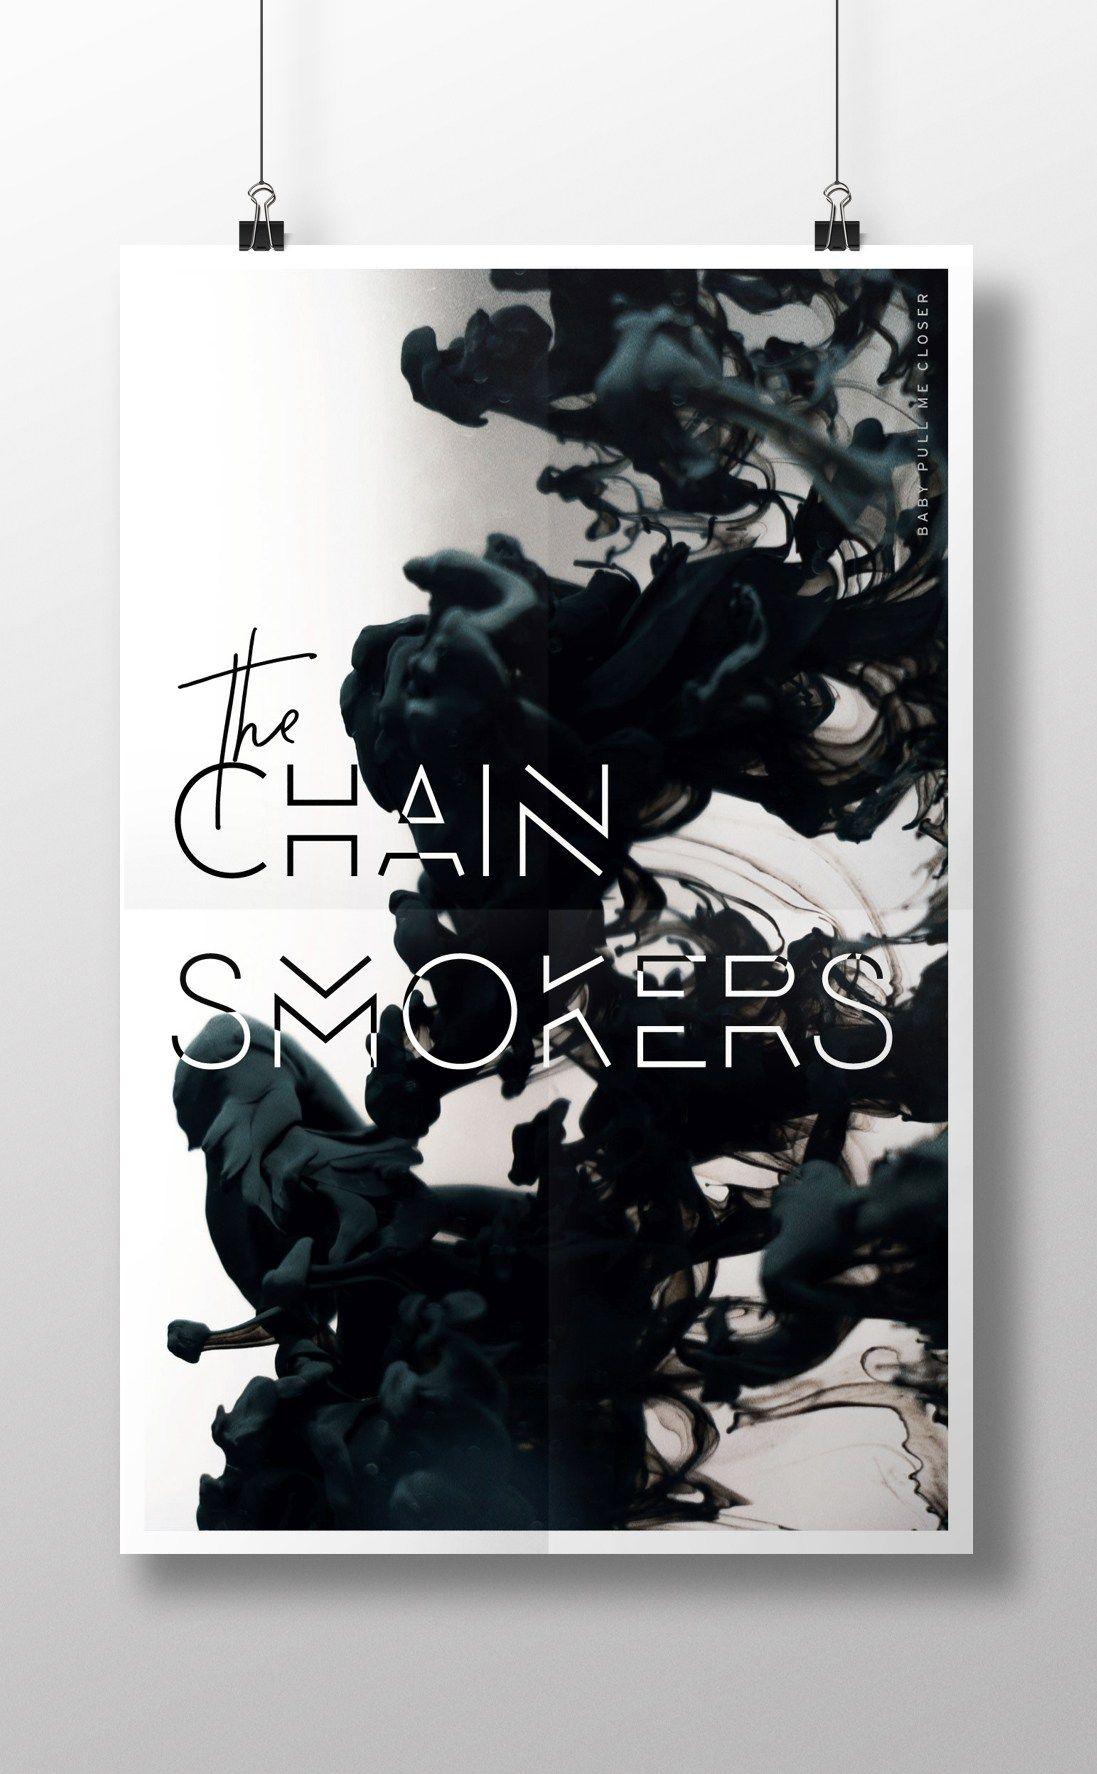 The Chainsmokers Poster design. logo. Chainsmokers